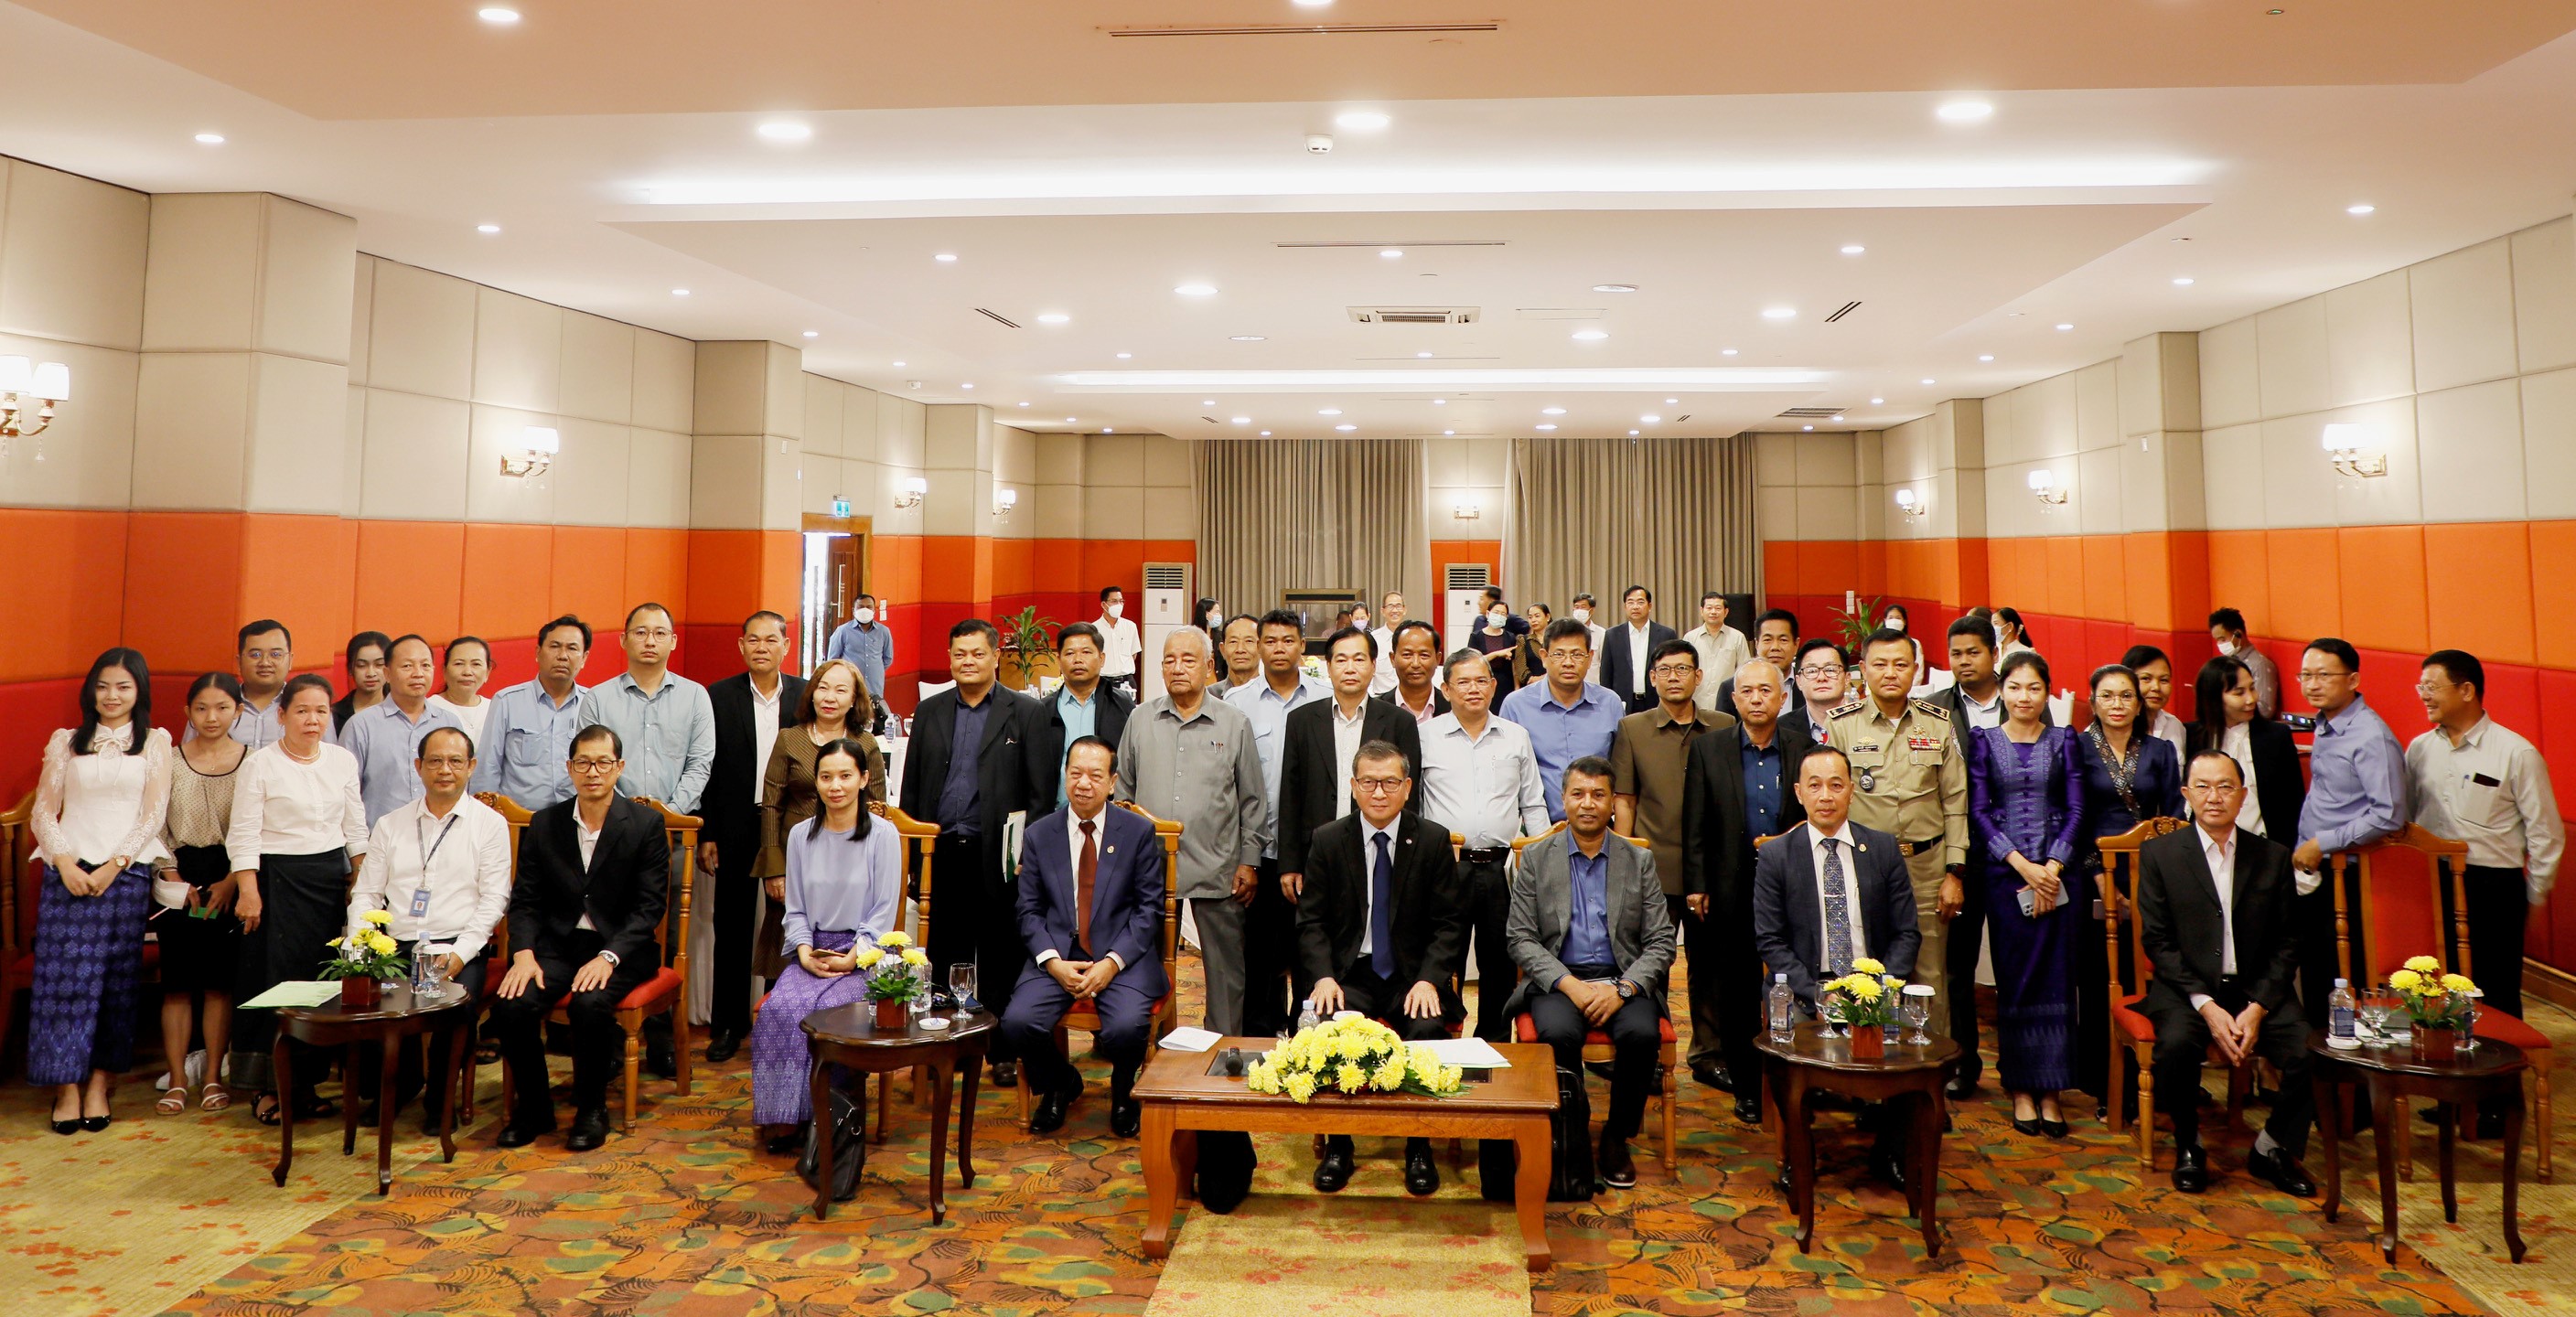 The launch of Cambodia National Adults Tobacco Survey, held on 21 February in Phnom Penh. The meeting was attended by senior government officials from almost all ministries under the lead of Secretary of State, MOH. 